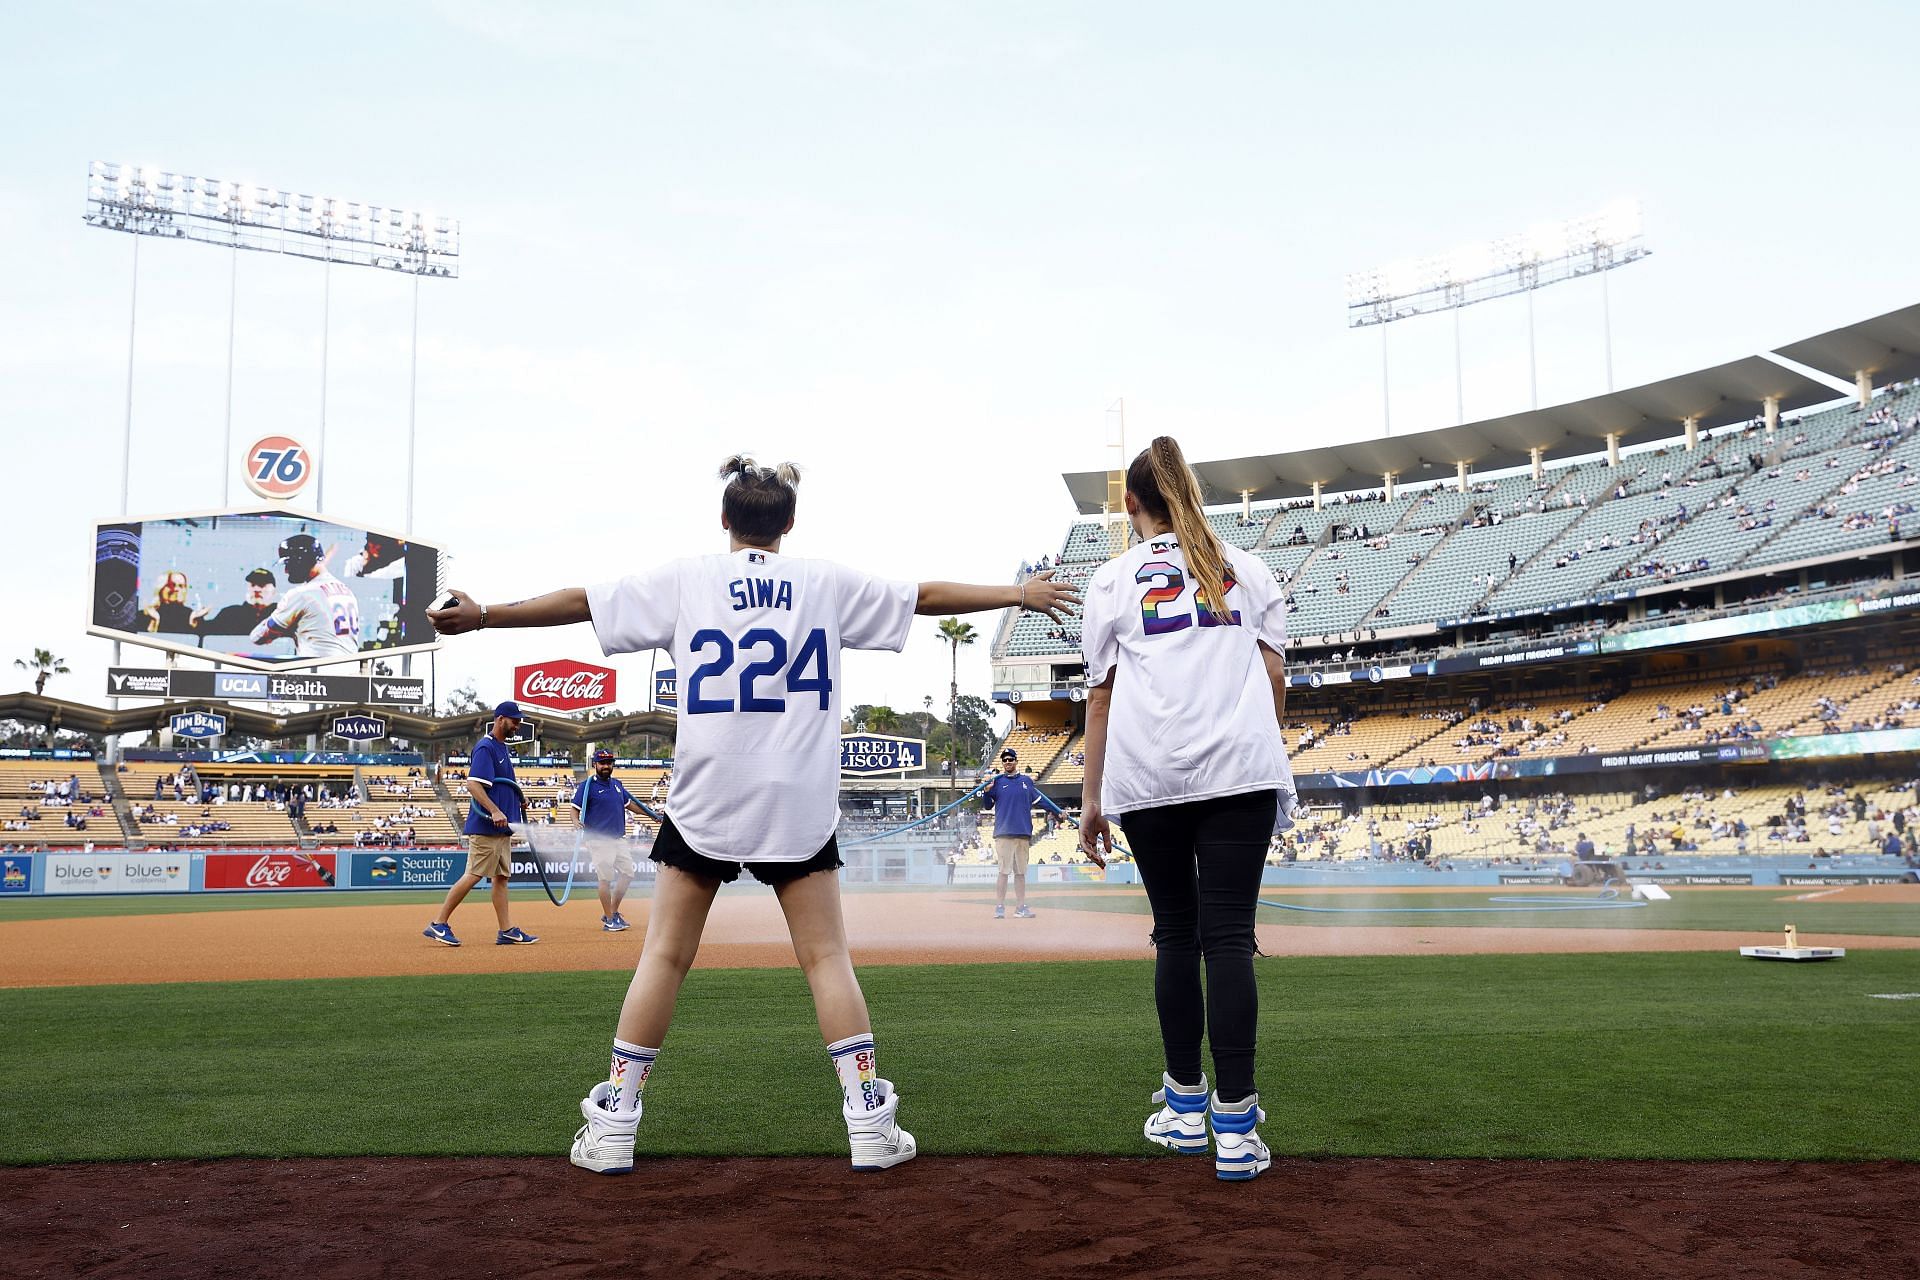 The Dodgers have a Pride Night